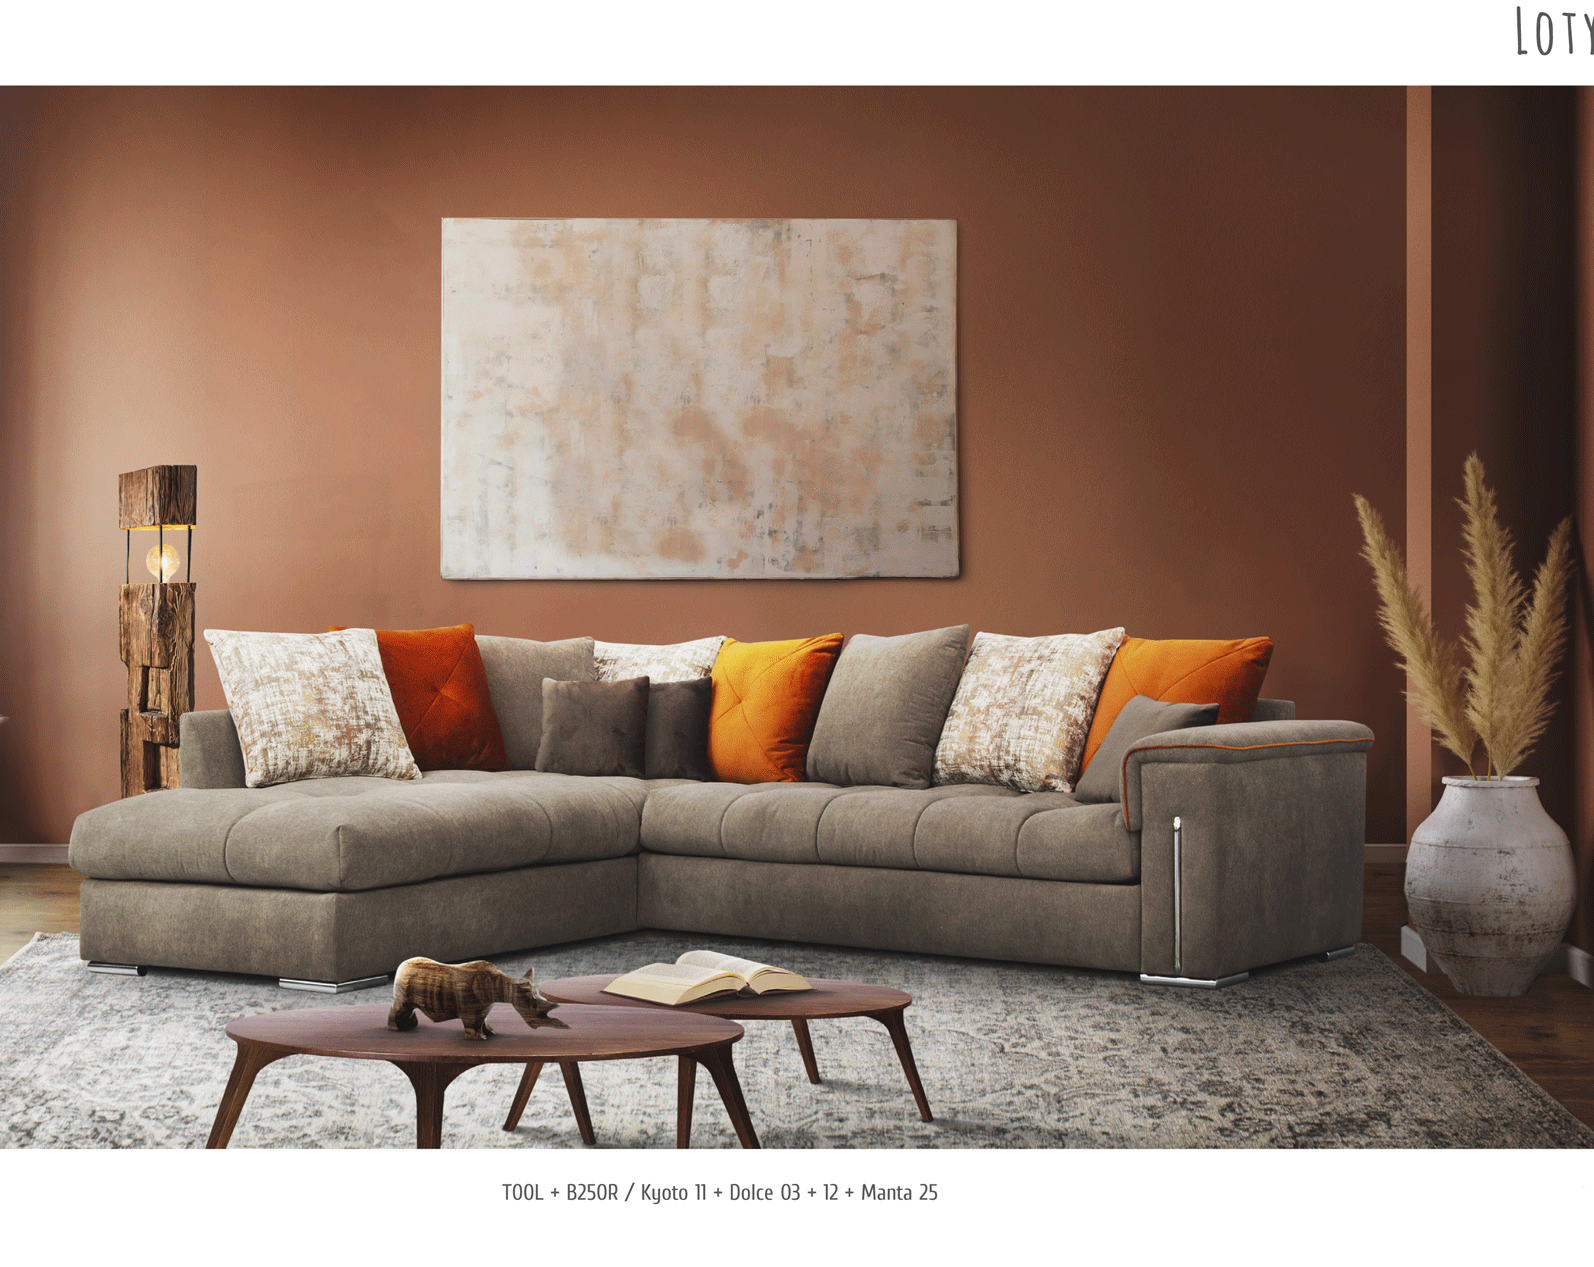 Brands European Living Collection Loty Sectional